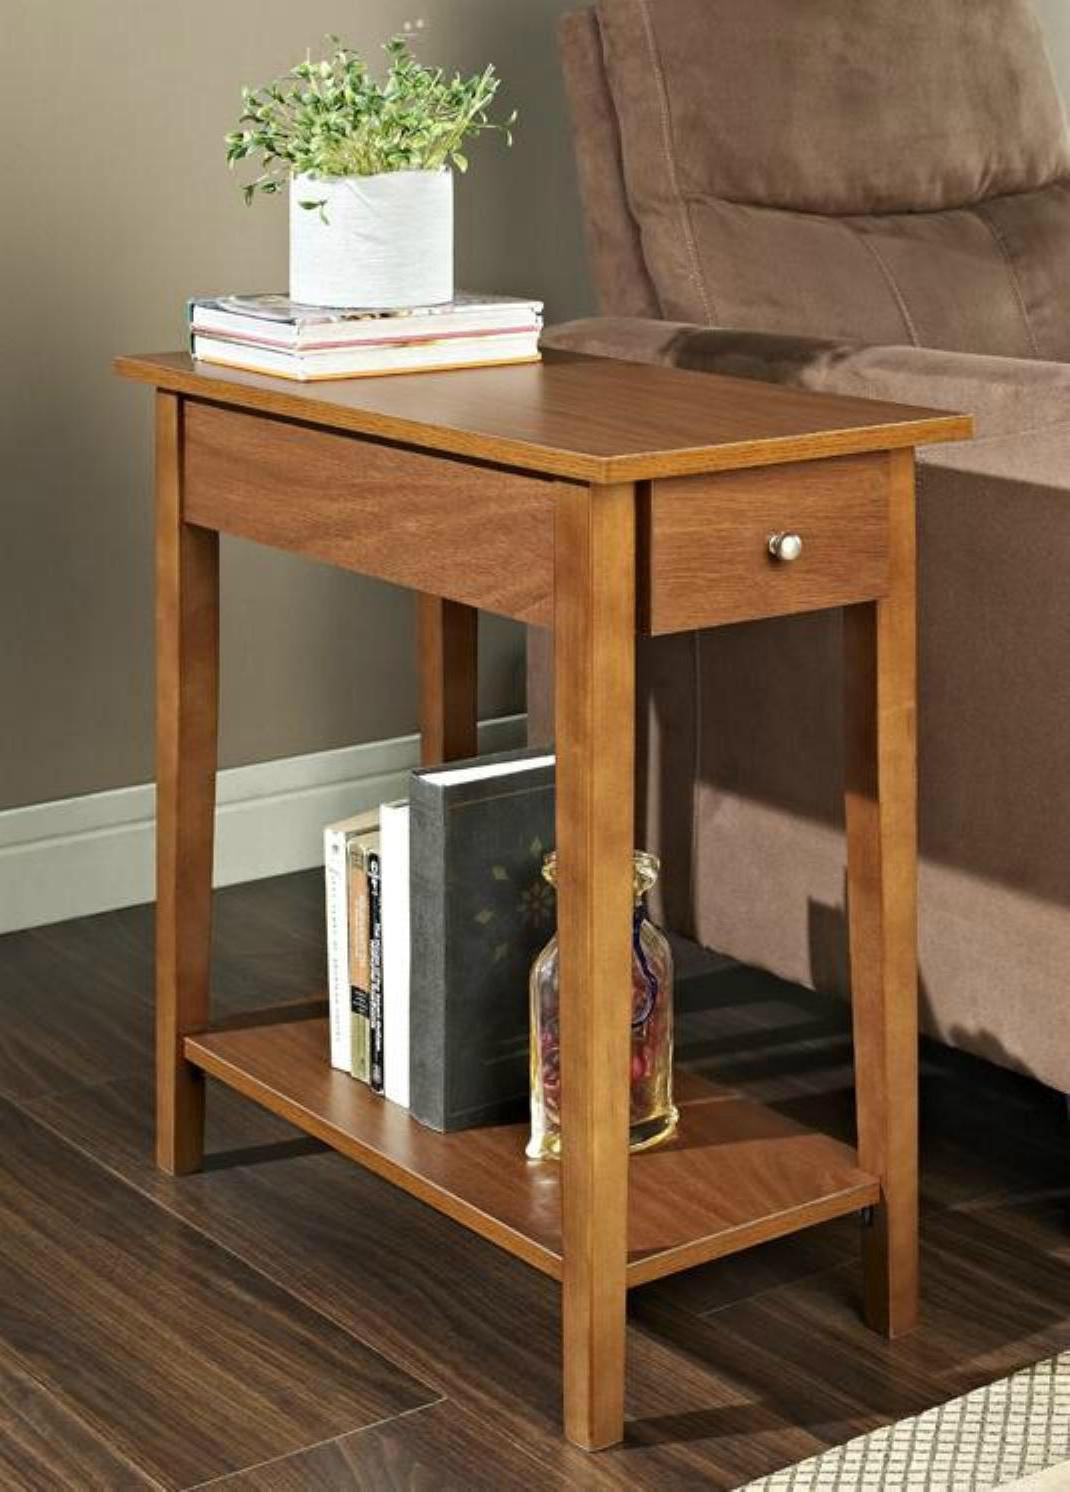 Side Tables Living Room
 End Tables for Living Room Living Room Ideas on a Bud